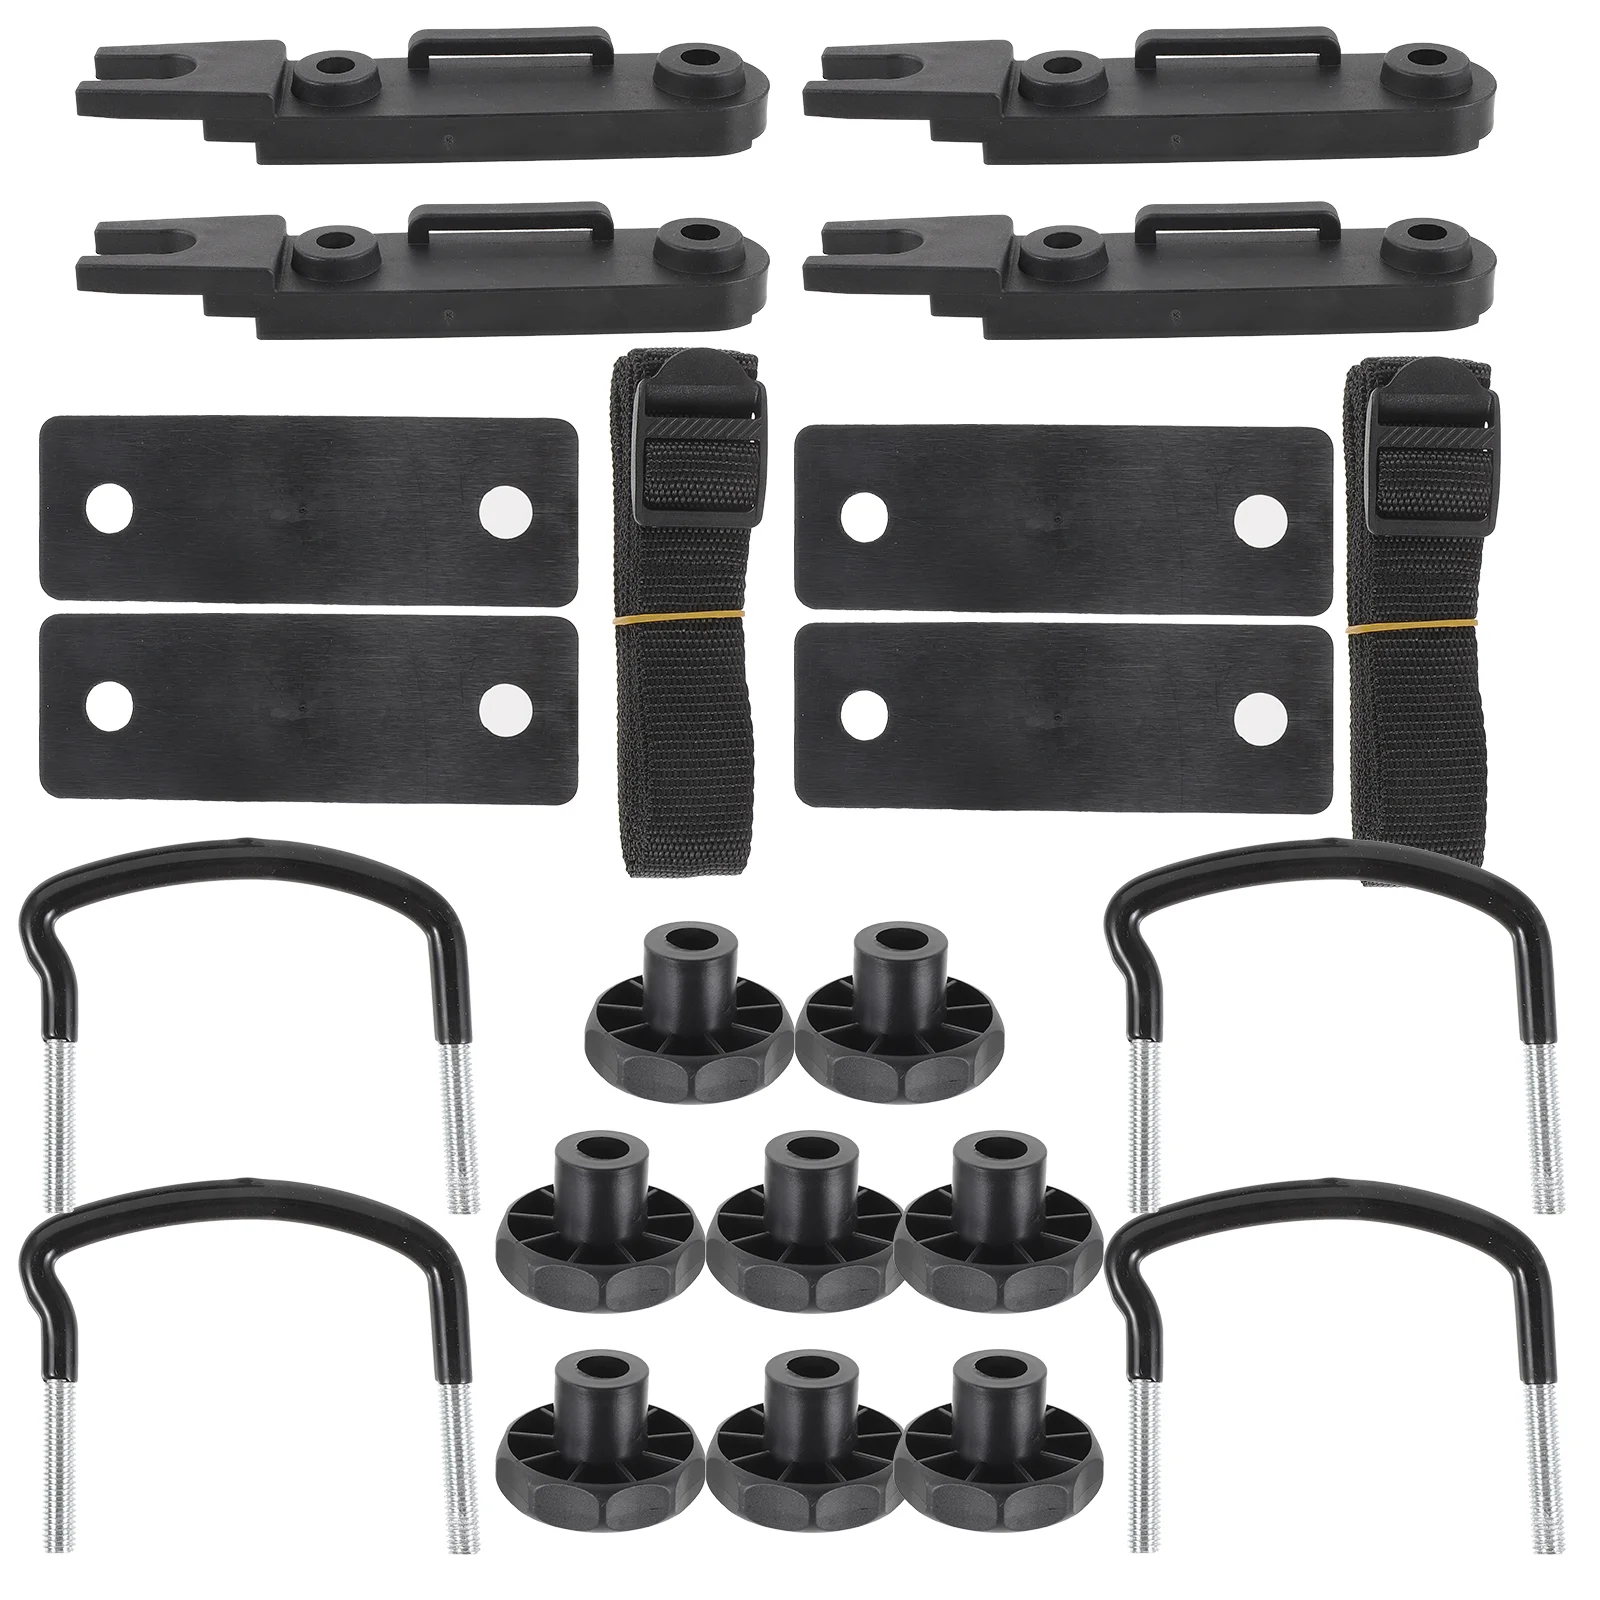 

Flat Roof Rack Clamps Installation Accessory Cargo Carrier Bolts Mounting Fitting Brackets Lock Nuts Rooftop Kit Luggage